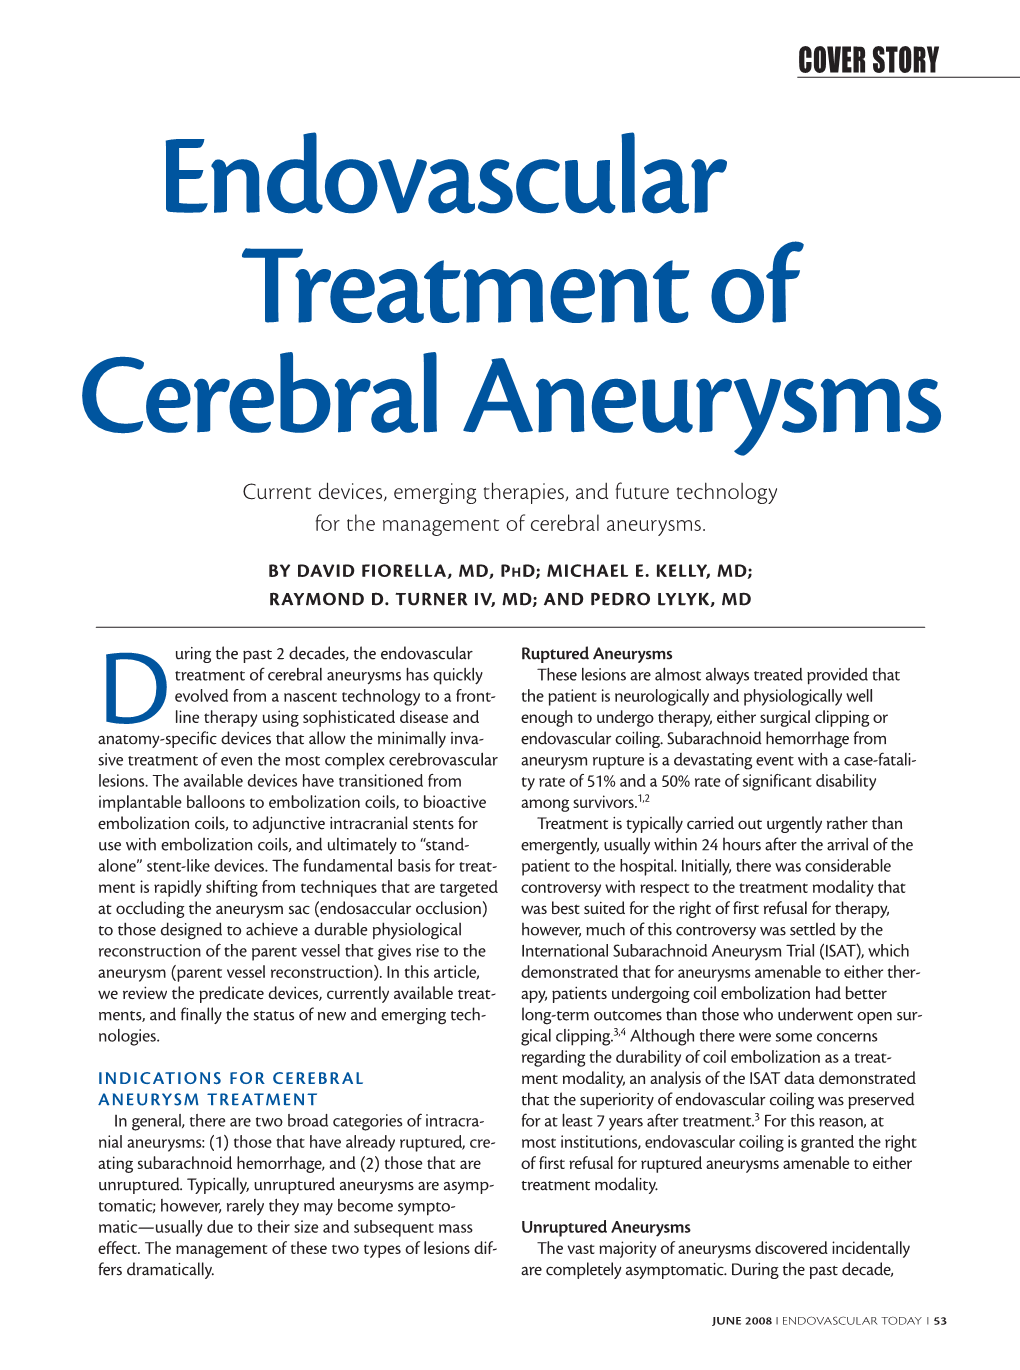 Endovascular Treatment of Cerebral Aneurysms Current Devices, Emerging Therapies, and Future Technology for the Management of Cerebral Aneurysms